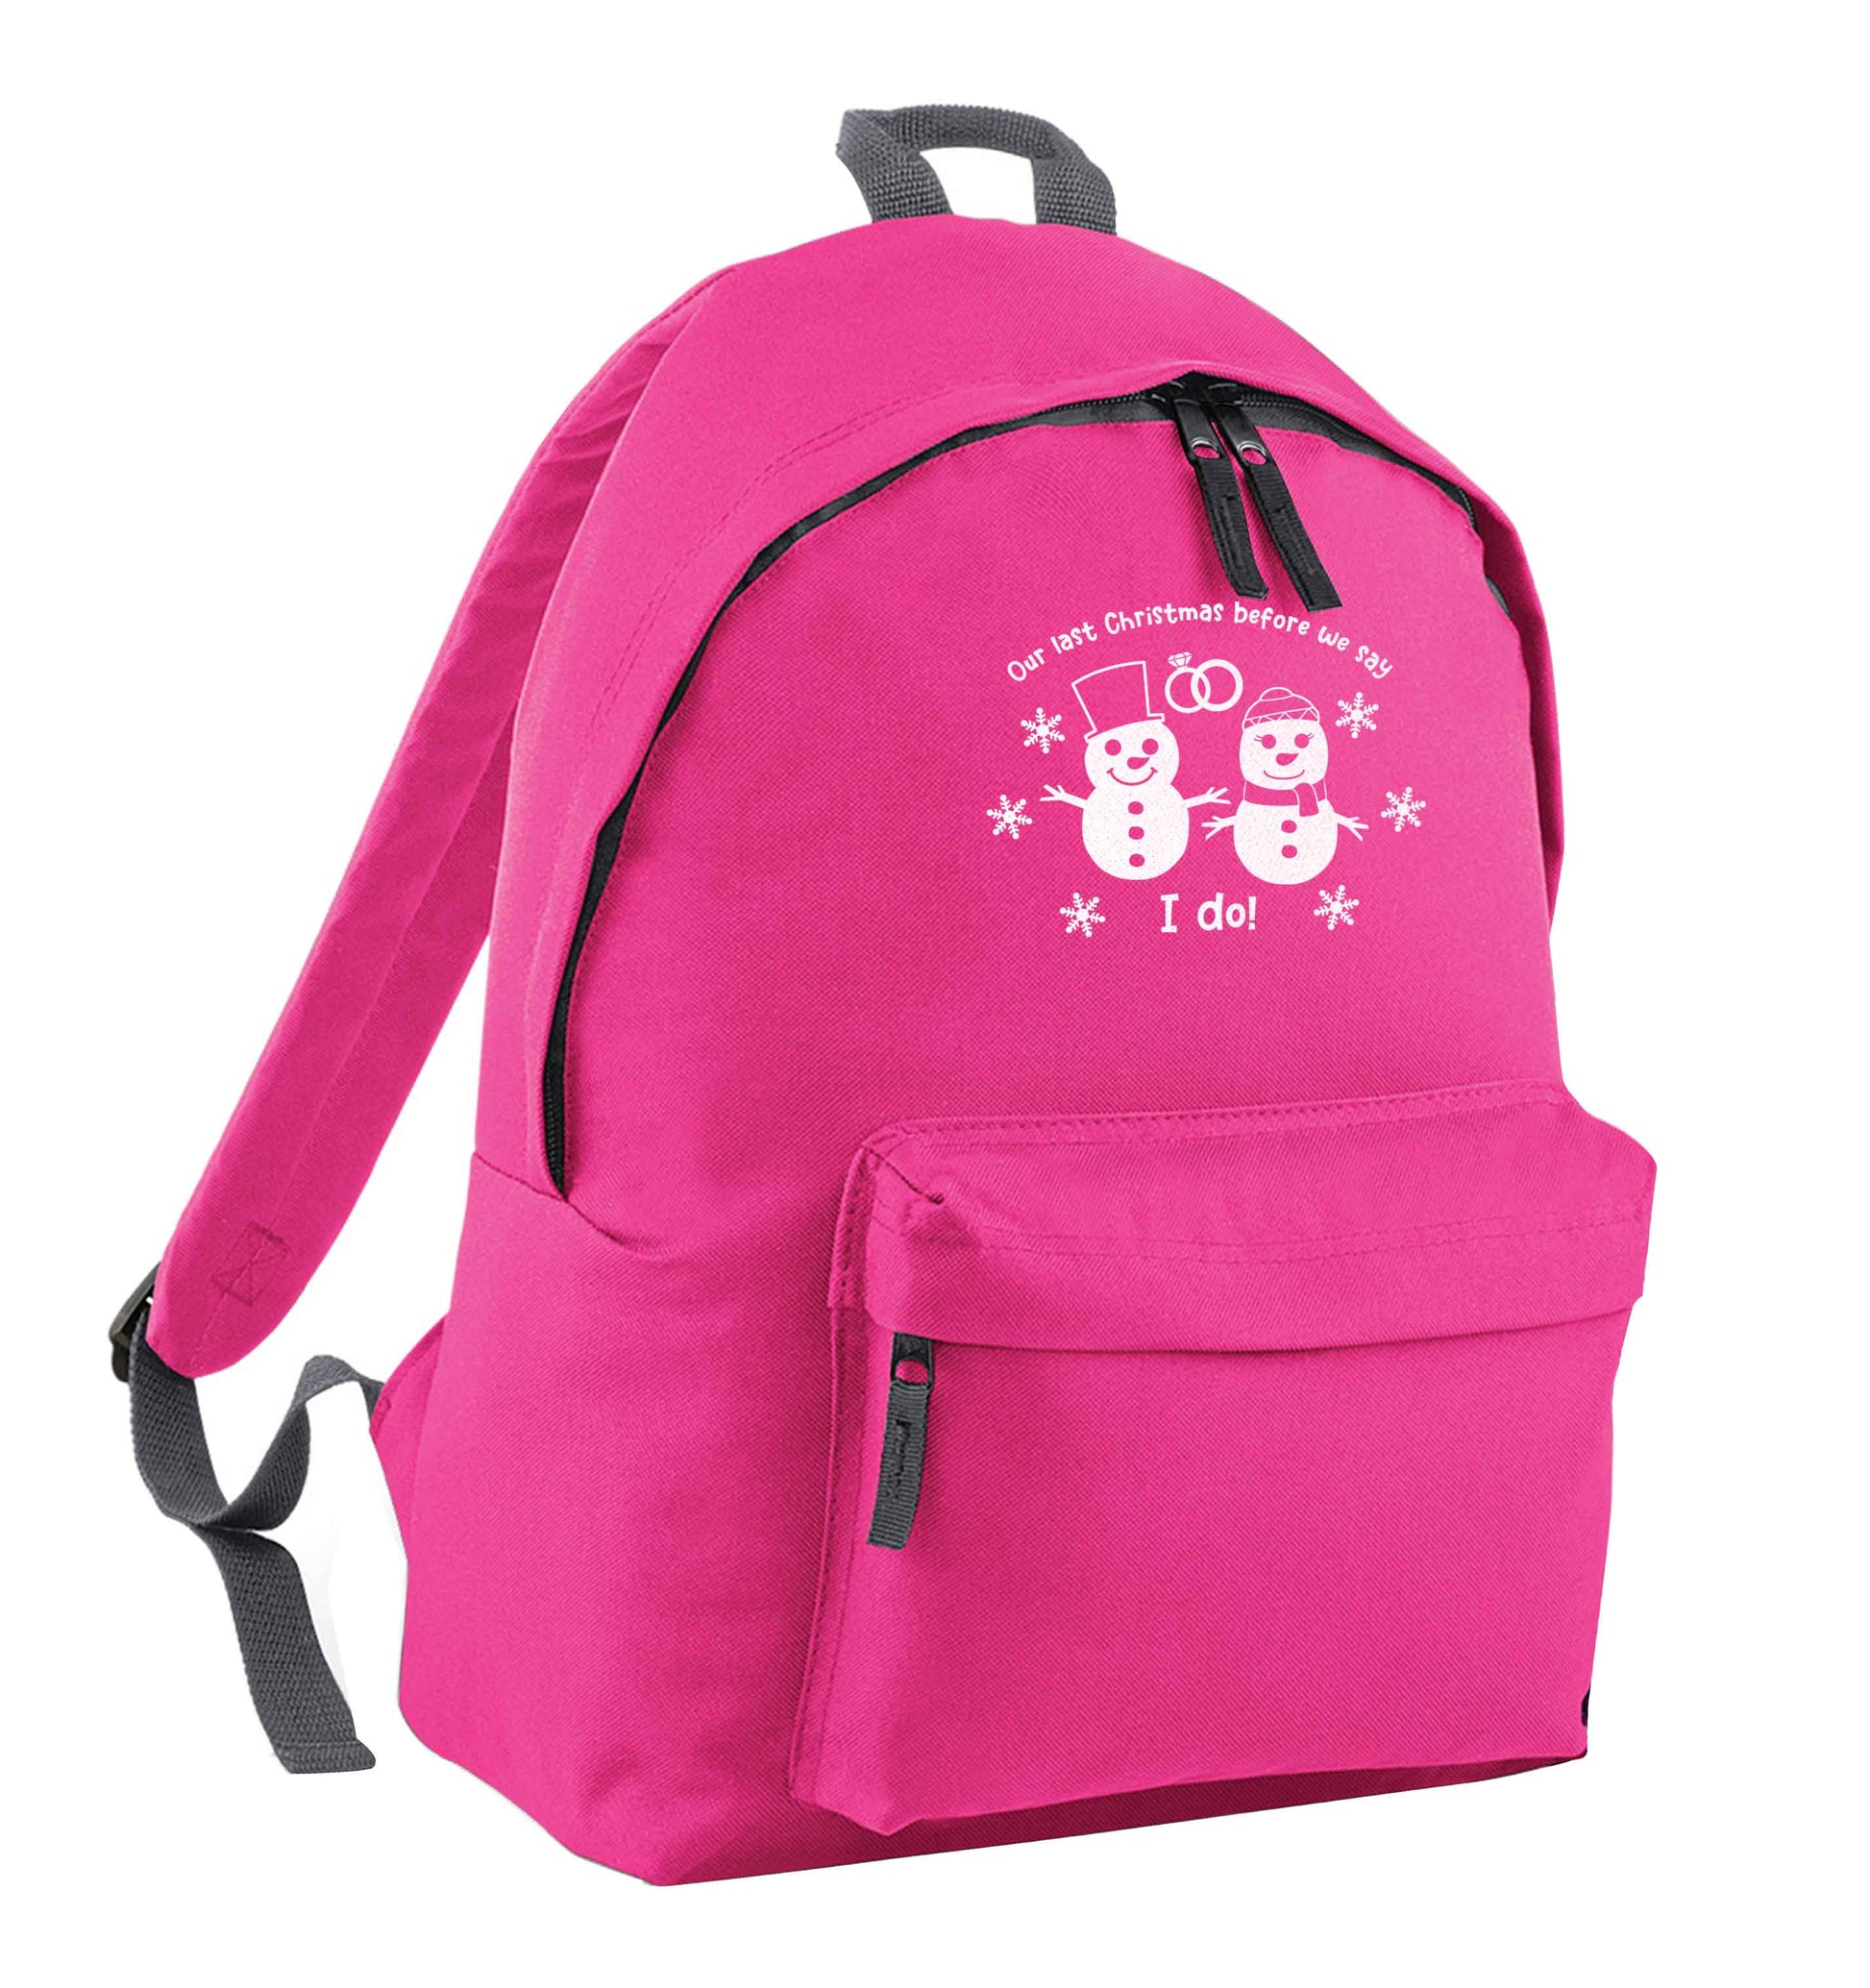 Last Christmas before we say I do pink adults backpack